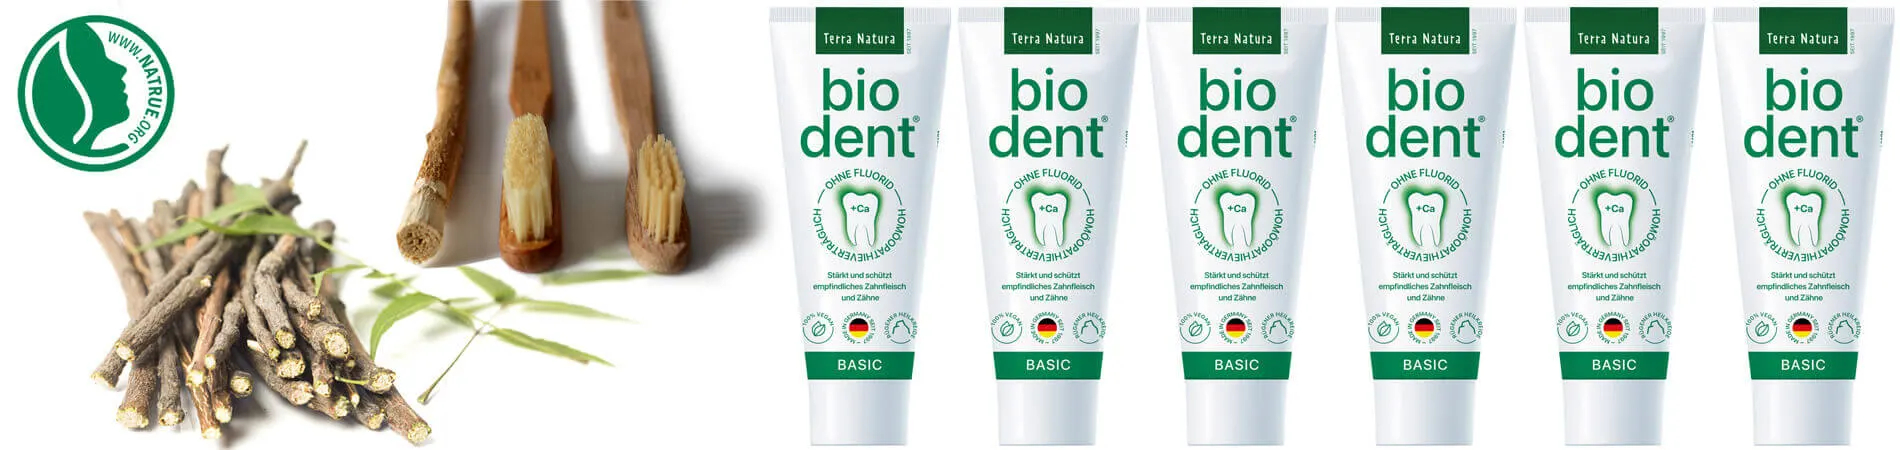 Biodent Basics Toothpaste without fluoride buy Bio dent...